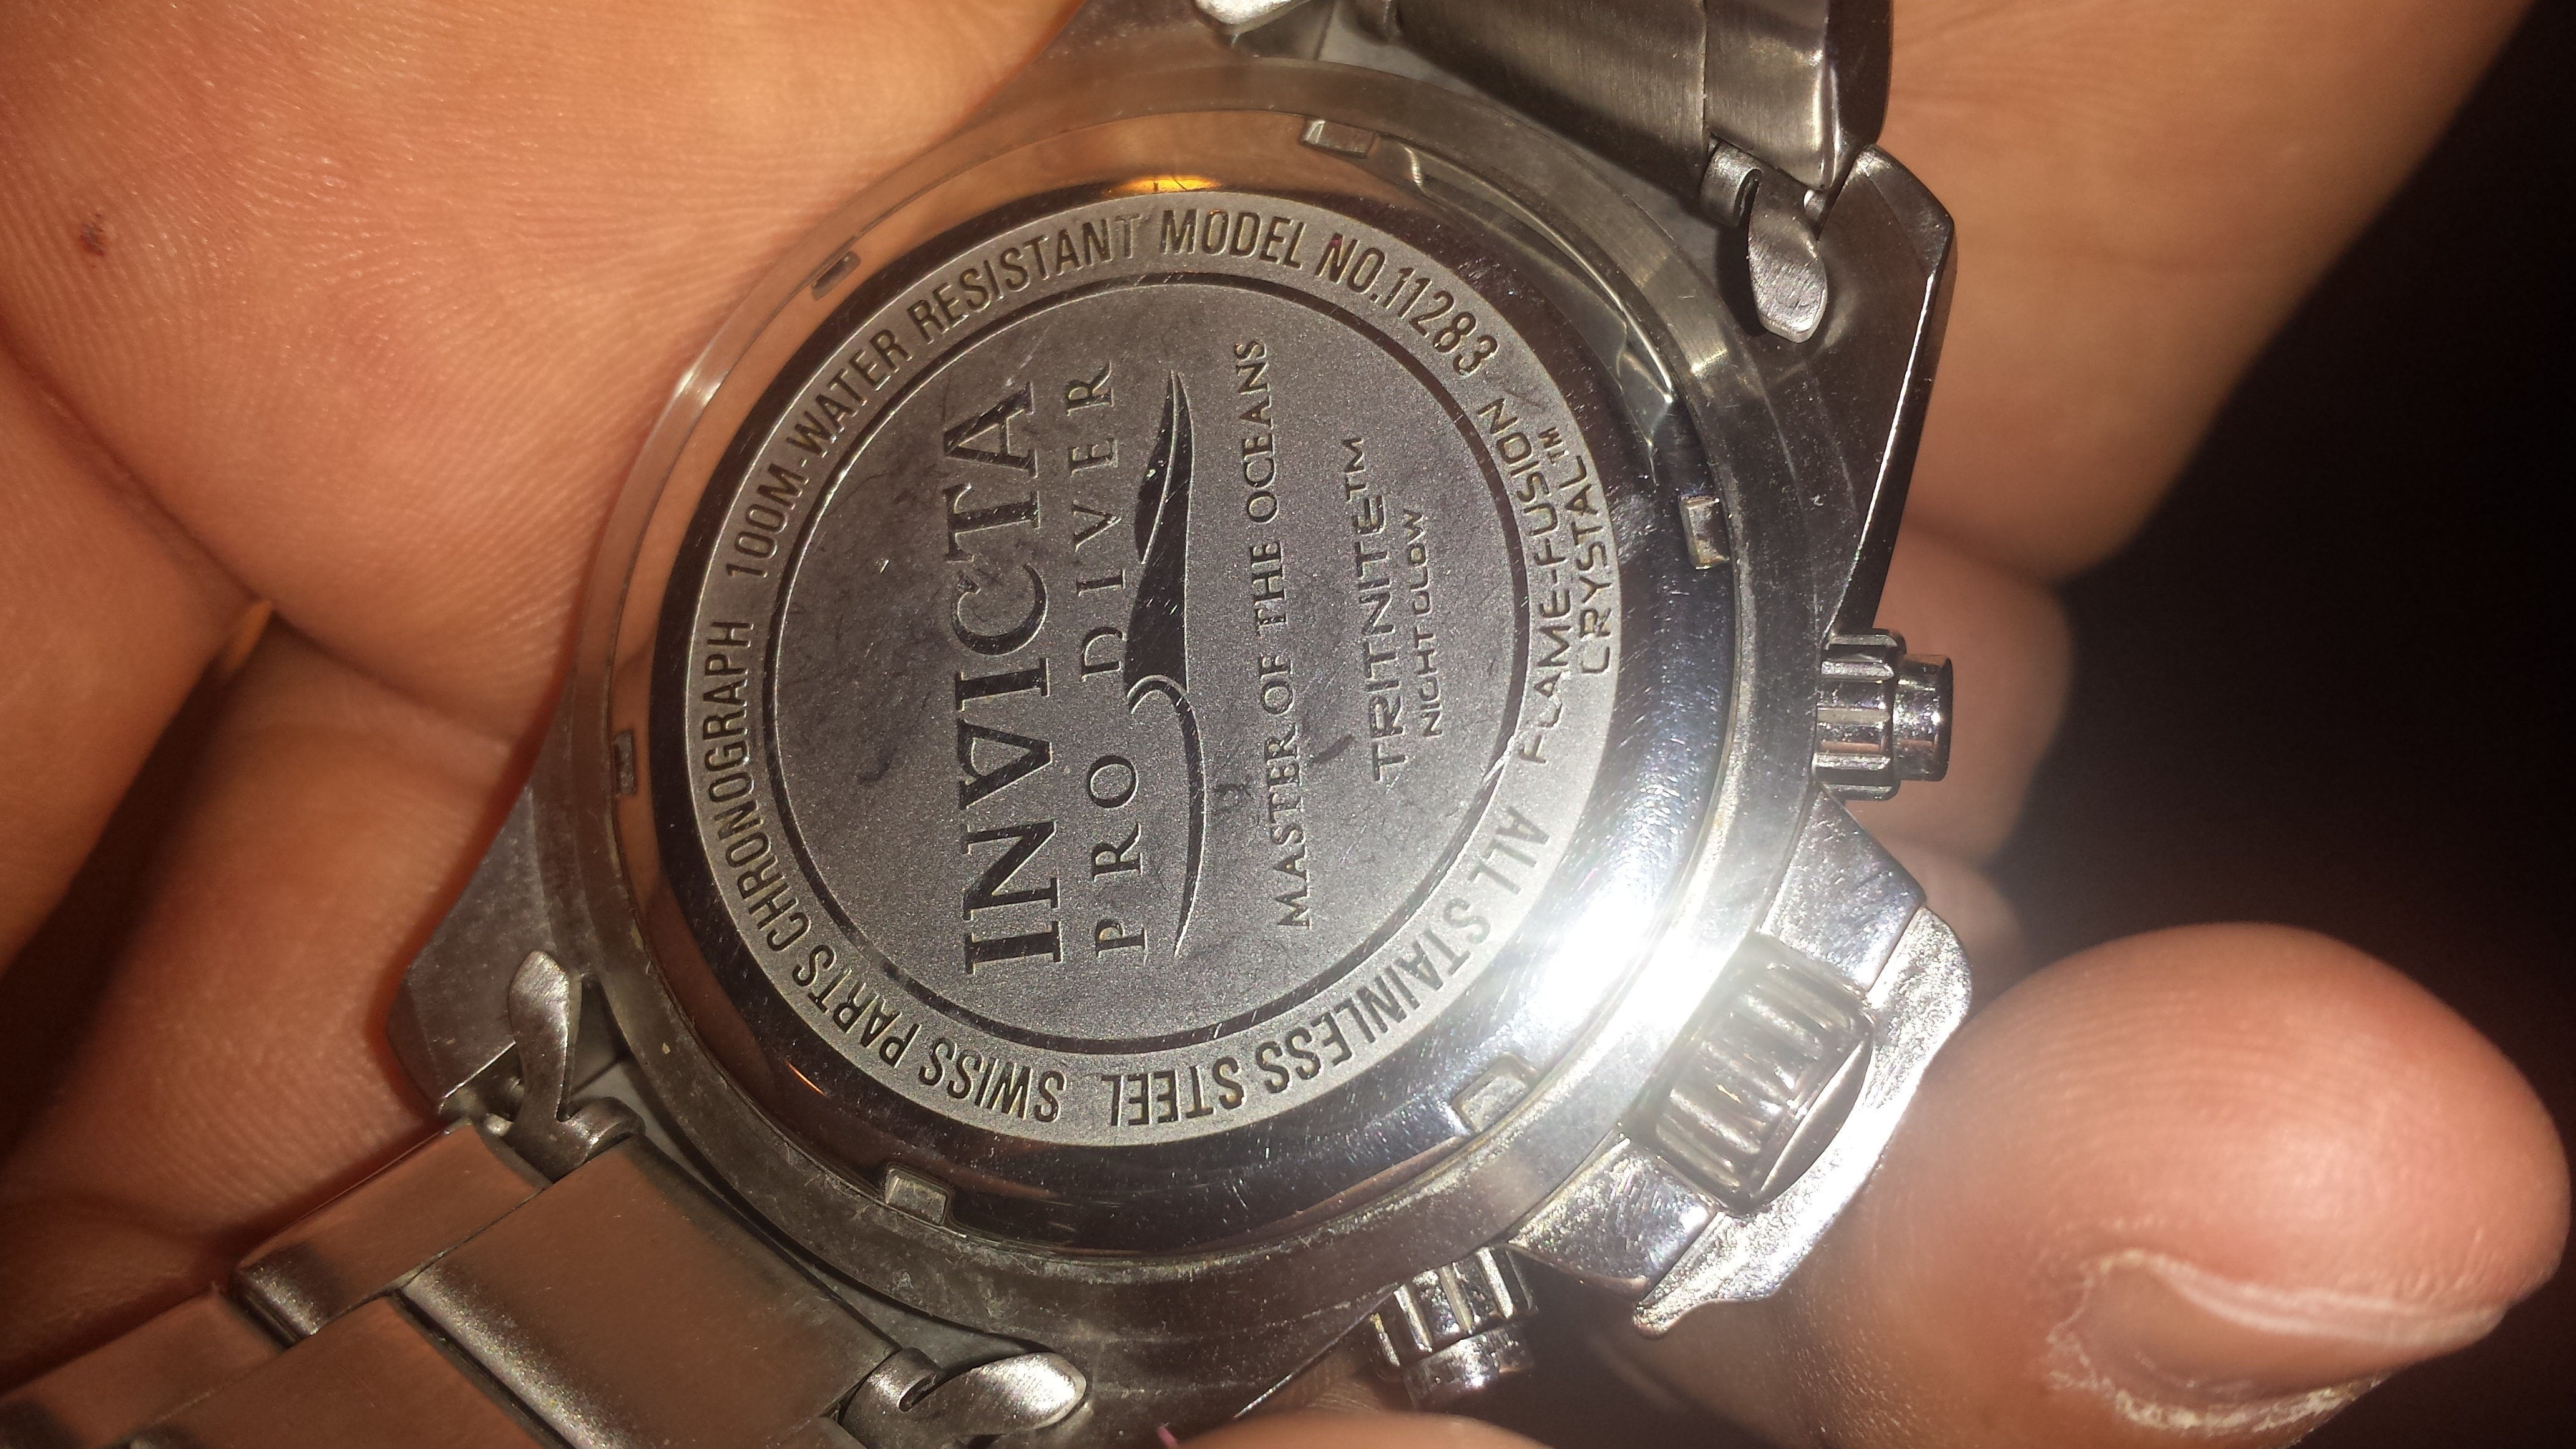 Top 177 Complaints and Reviews about Invicta Watches | Page 4